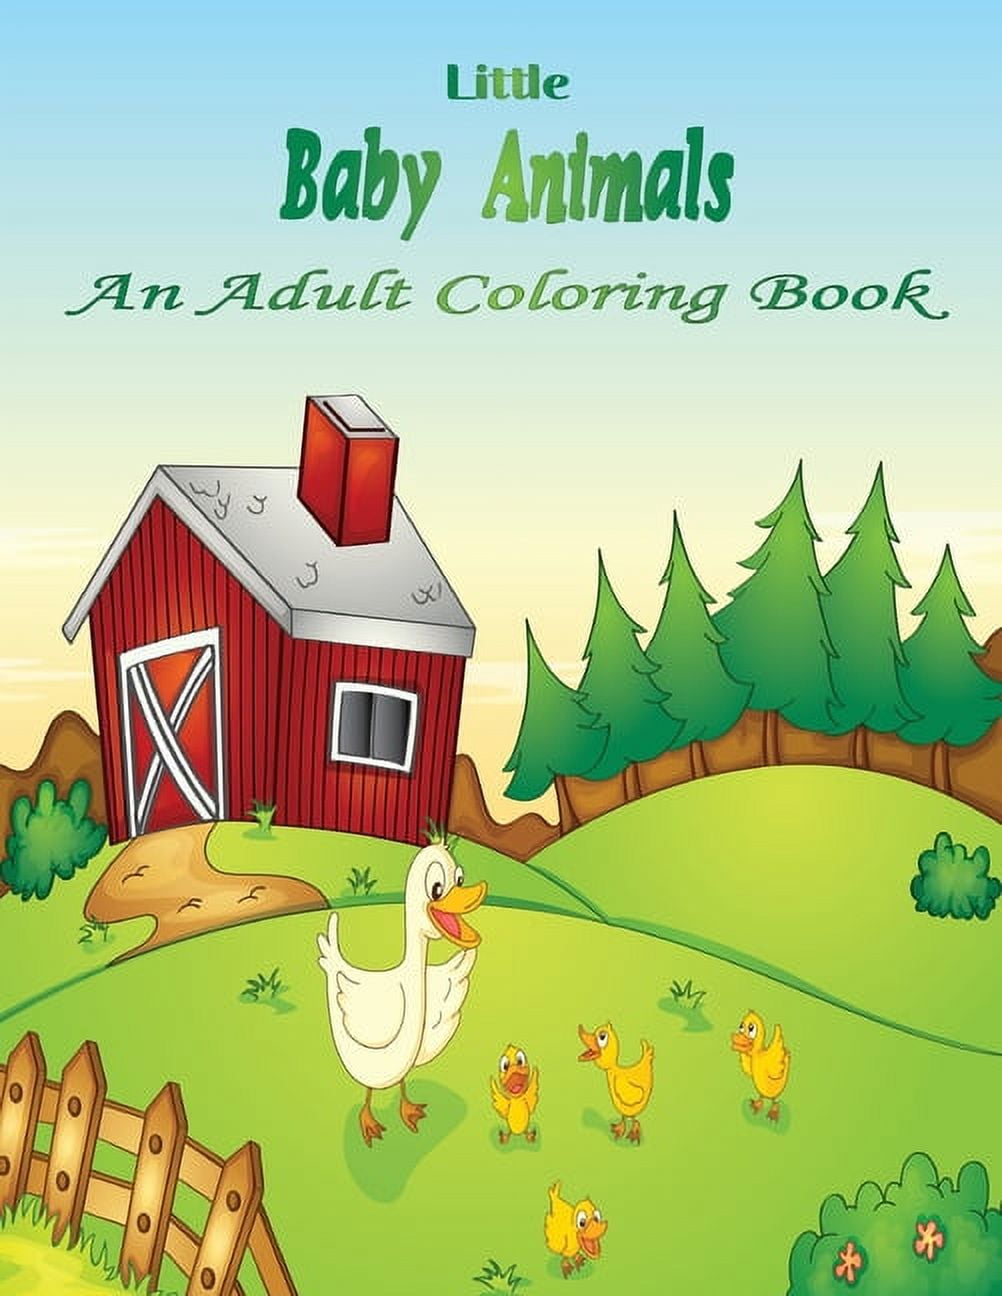 Adult Coloring Book Stress Relieving Animal Designs: An Adult Coloring Book  Featuring Super Cute and Adorable Baby Woodland Animals for Stress Relief  (Paperback)